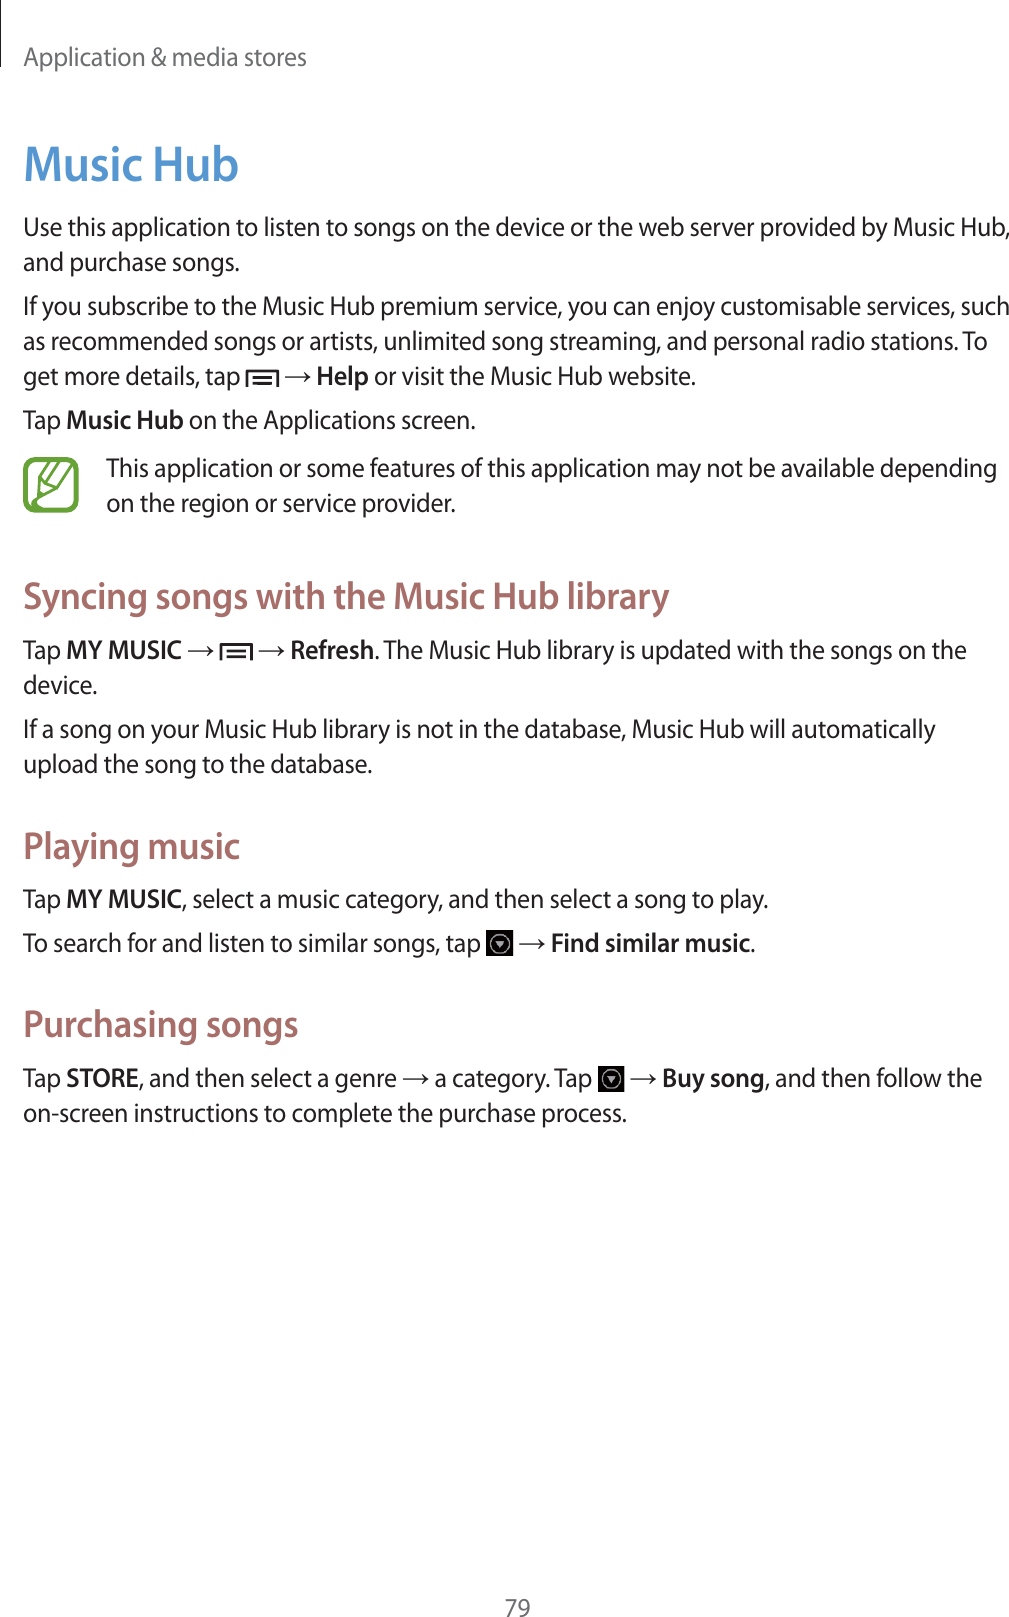 Application &amp; media stores79Music HubUse this application to listen to songs on the device or the web server provided by Music Hub, and purchase songs.If you subscribe to the Music Hub premium service, you can enjoy customisable services, such as recommended songs or artists, unlimited song streaming, and personal radio stations. To get more details, tap   ĺ Help or visit the Music Hub website.Tap Music Hub on the Applications screen.This application or some features of this application may not be available depending on the region or service provider.Syncing songs with the Music Hub libraryTap MY MUSIC ĺ   ĺ Refresh. The Music Hub library is updated with the songs on the device.If a song on your Music Hub library is not in the database, Music Hub will automatically upload the song to the database.Playing musicTap MY MUSIC, select a music category, and then select a song to play.To search for and listen to similar songs, tap   ĺ Find similar music.Purchasing songsTap STORE, and then select a genre ĺ a category. Tap   ĺ Buy song, and then follow the on-screen instructions to complete the purchase process.